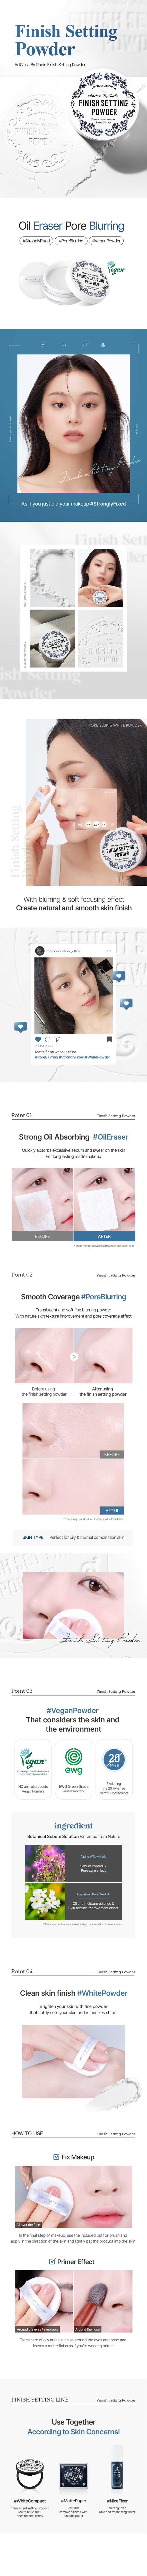 pore blurring oil absorbing strong fixing finish setting powder